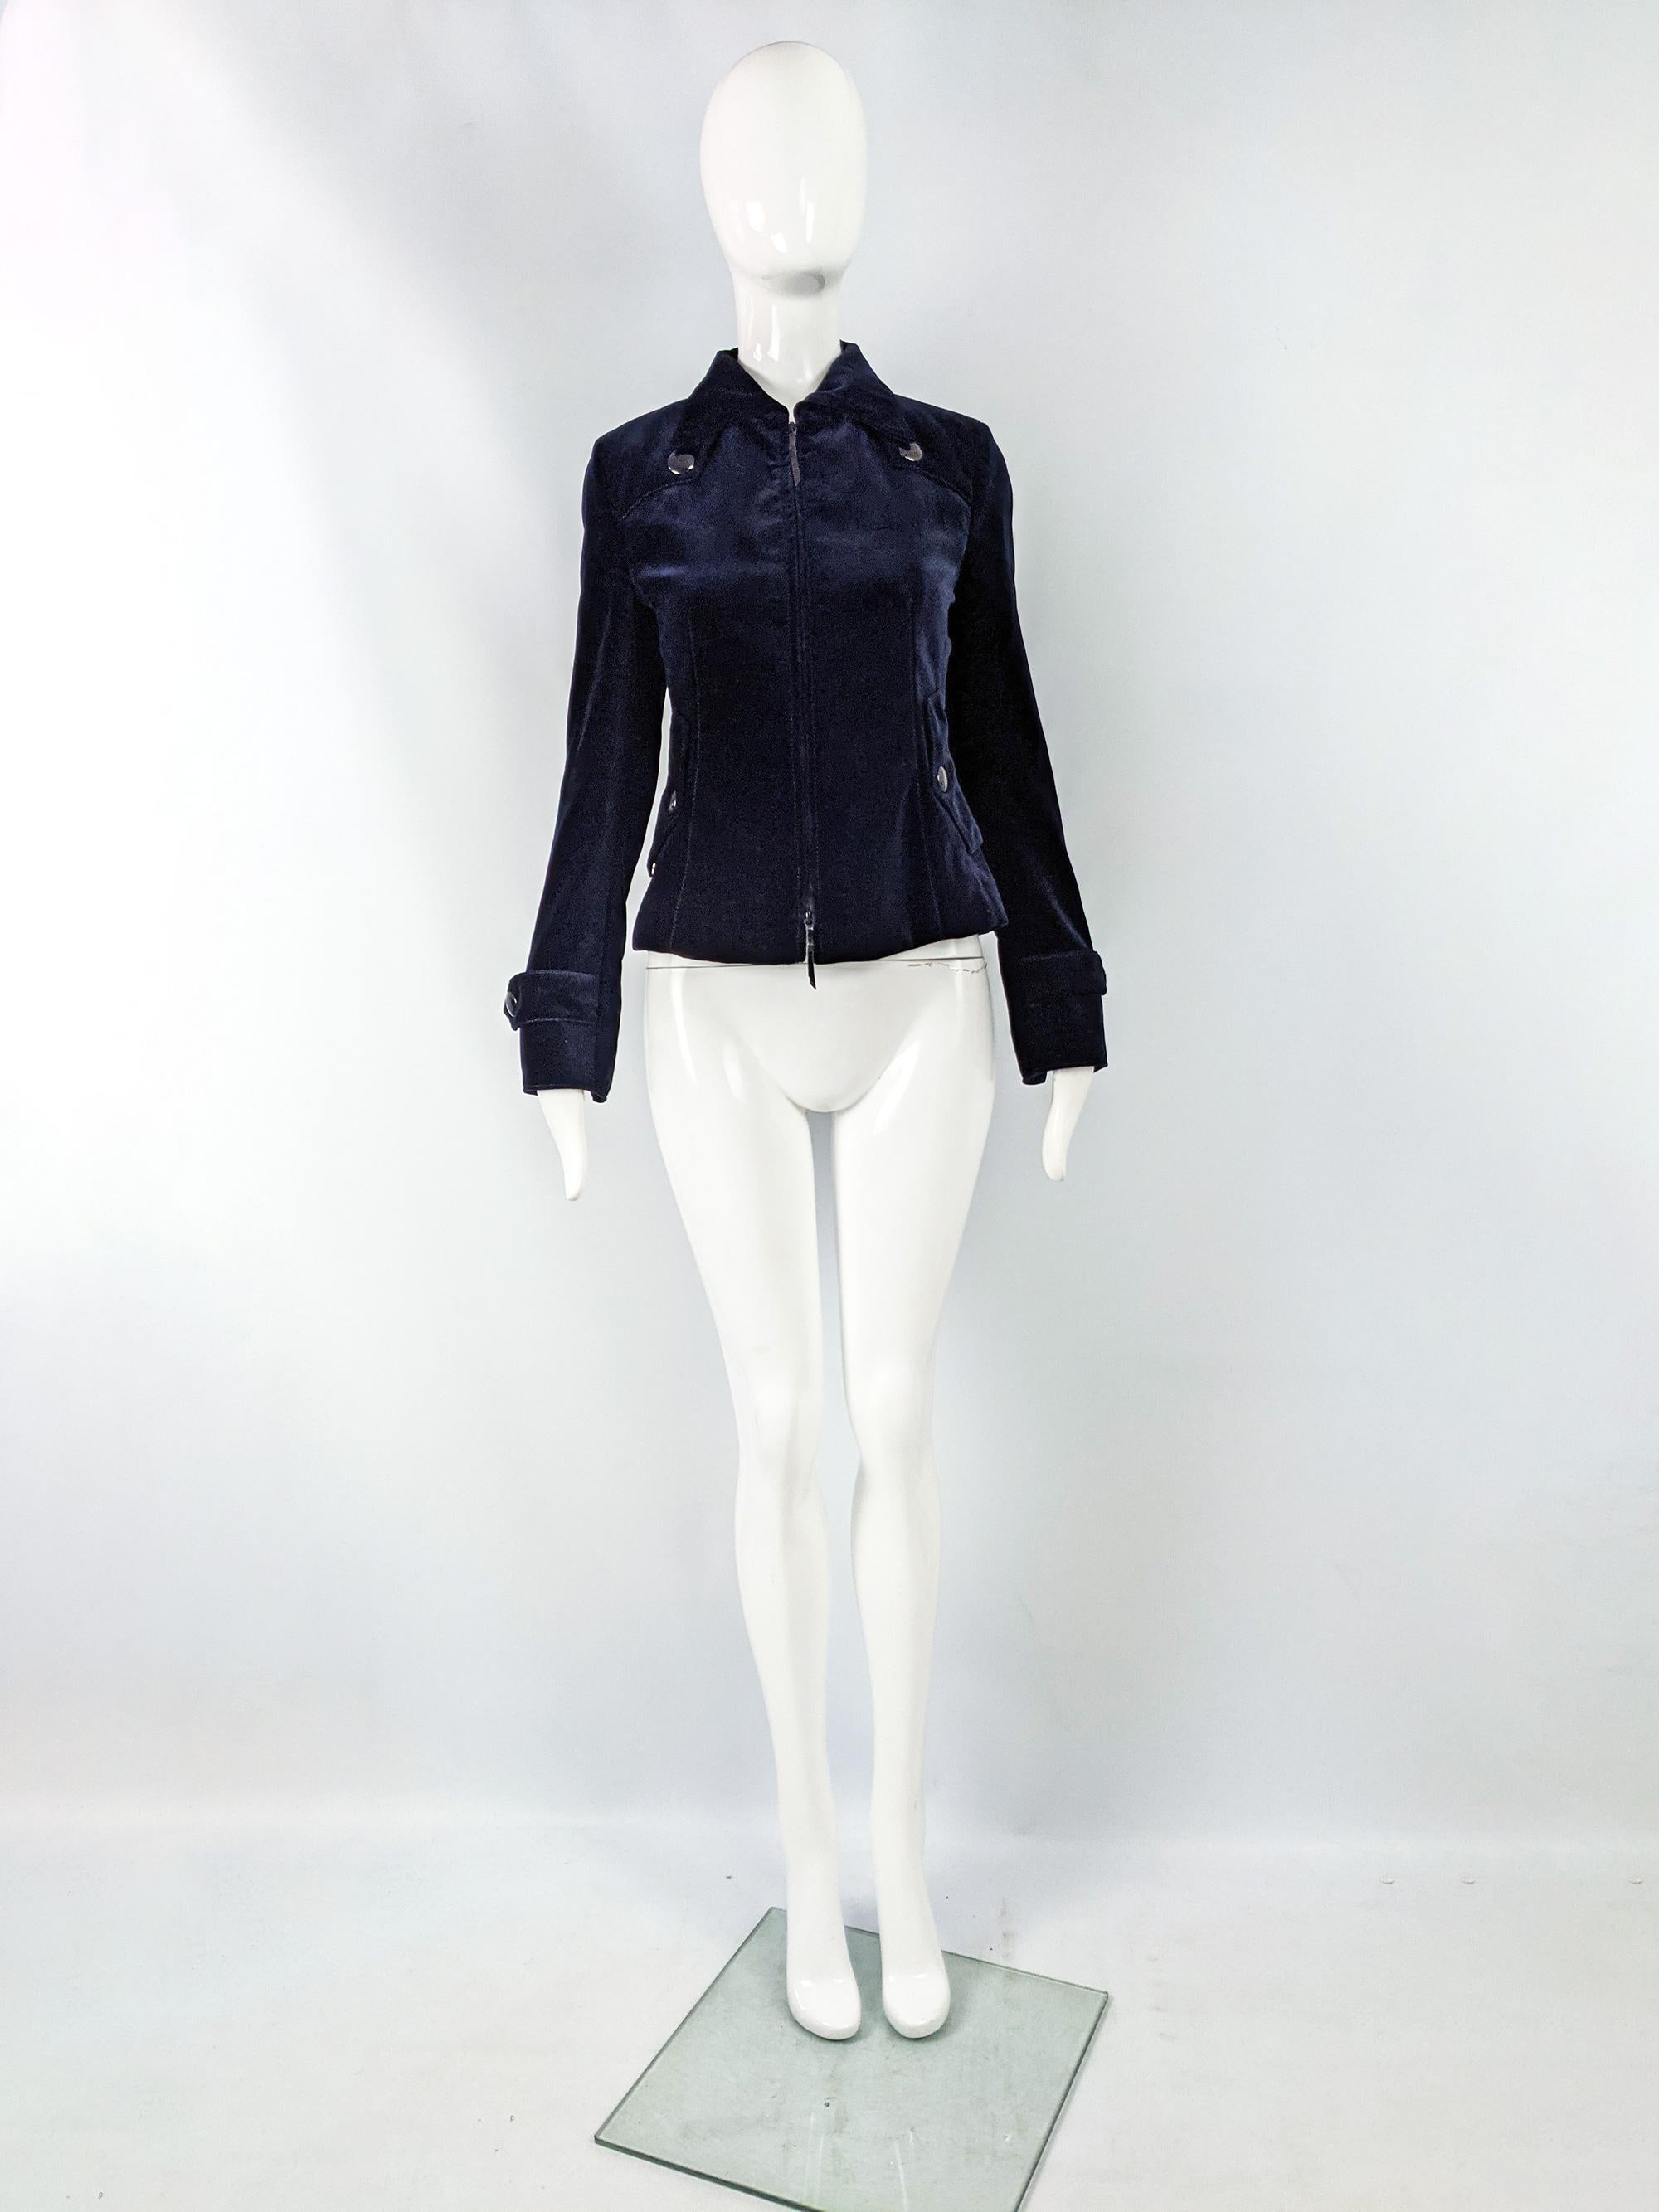 A chic vintage womens jacket from the 90s by luxury Swiss fashion house, Akris for high end department store, Bergdorf Goodman. In a deep midnight blue velvet, highlighted with beautiful top stitching. It has a zip front, lightly nipped waist and